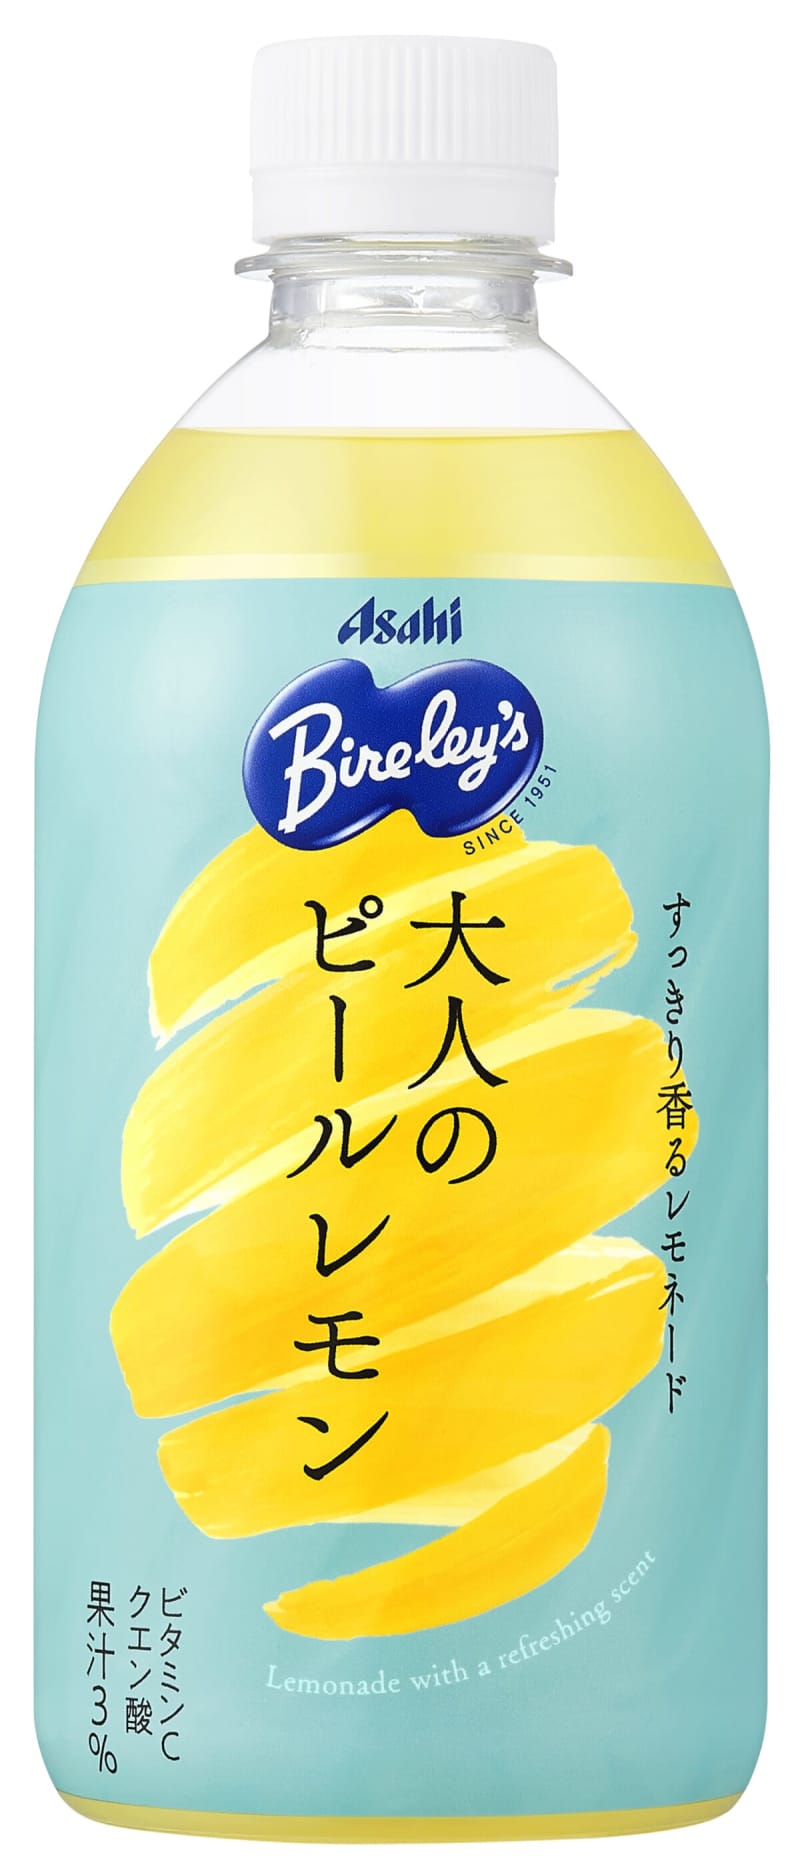 "Bayarice Adult Peel Lemon" will be released for a limited time!